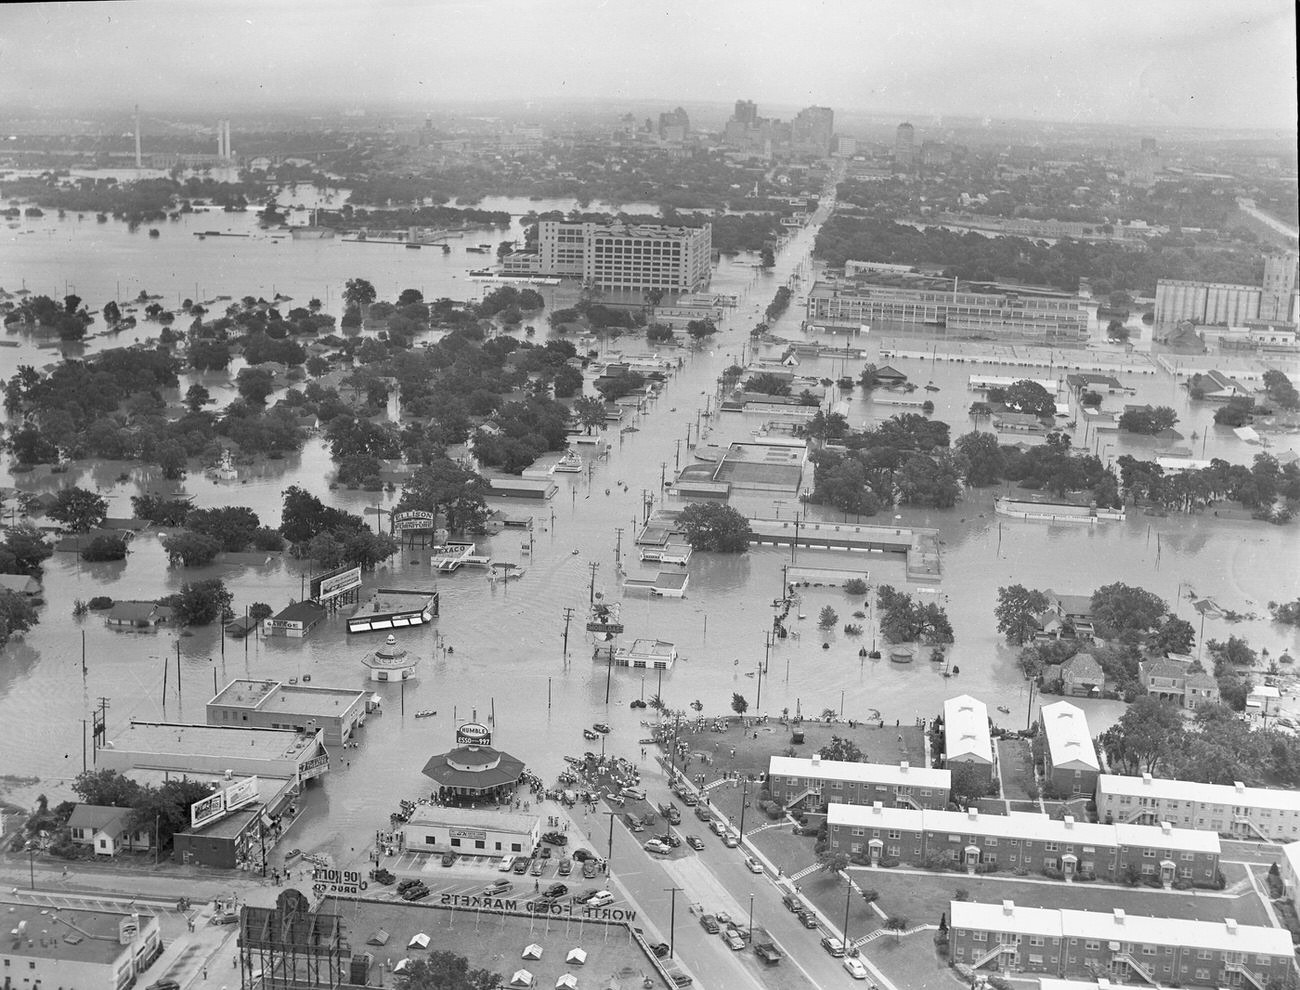 Fort Worth, Texas, flood of 1949, showing 7th Street under water. The large Montgomery Ward building in the upper center received extensive damage. Downtown Fort Worth can be seen in the distance.